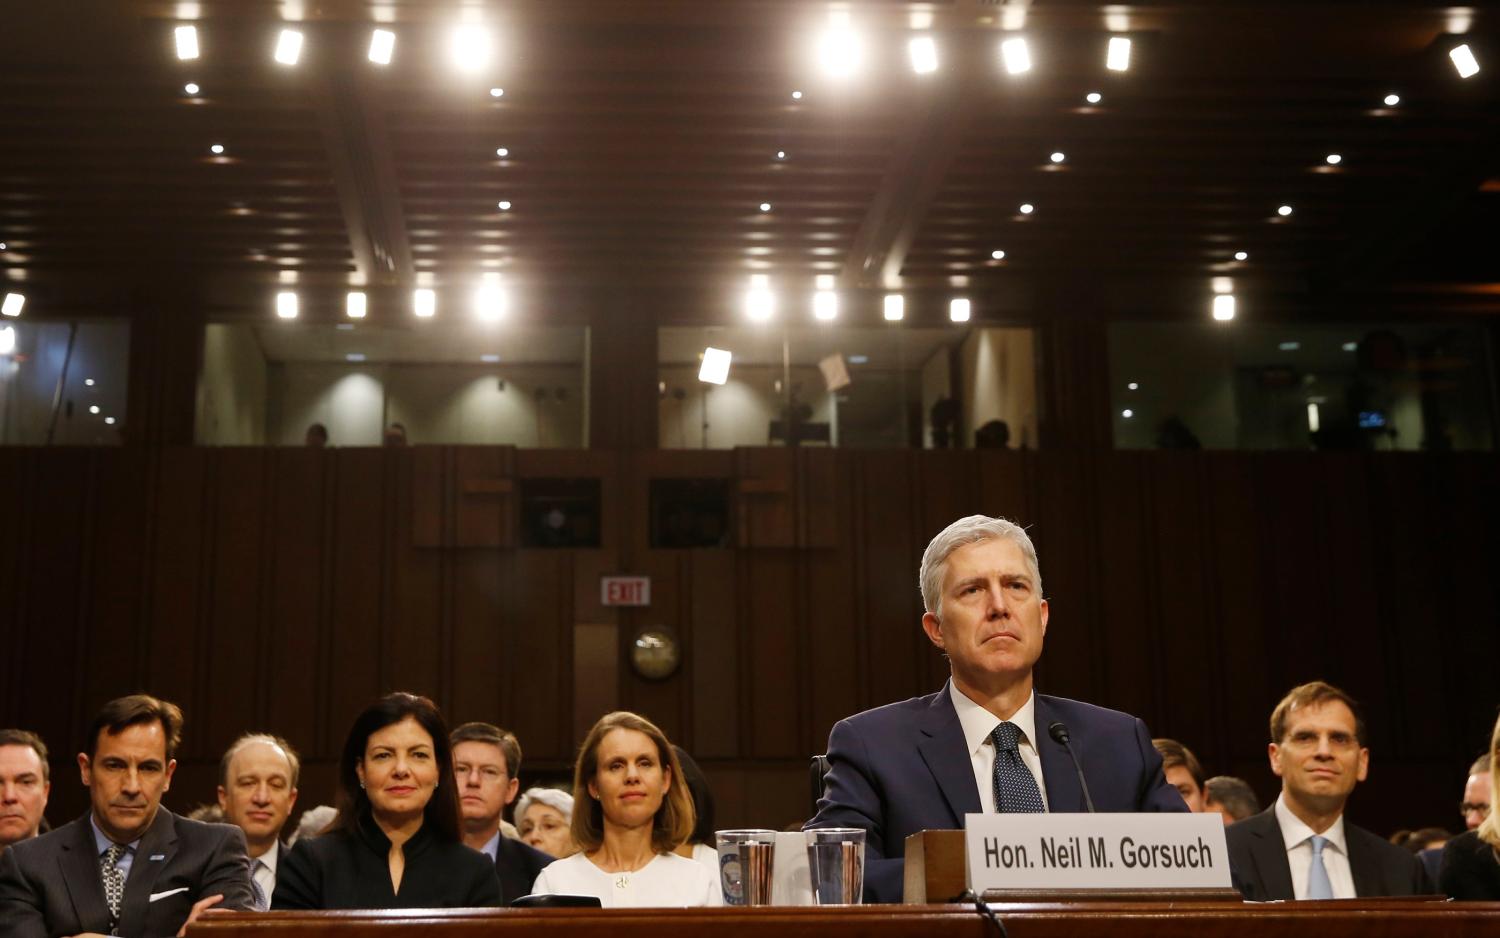 U.S. Supreme Court nominee judge Neil Gorsuch sits for a third day of his Senate Judiciary Committee confirmation hearing on Capitol Hill in Washington, U.S., March 22, 2017. REUTERS/Jonathan Ernst - RTX3261U